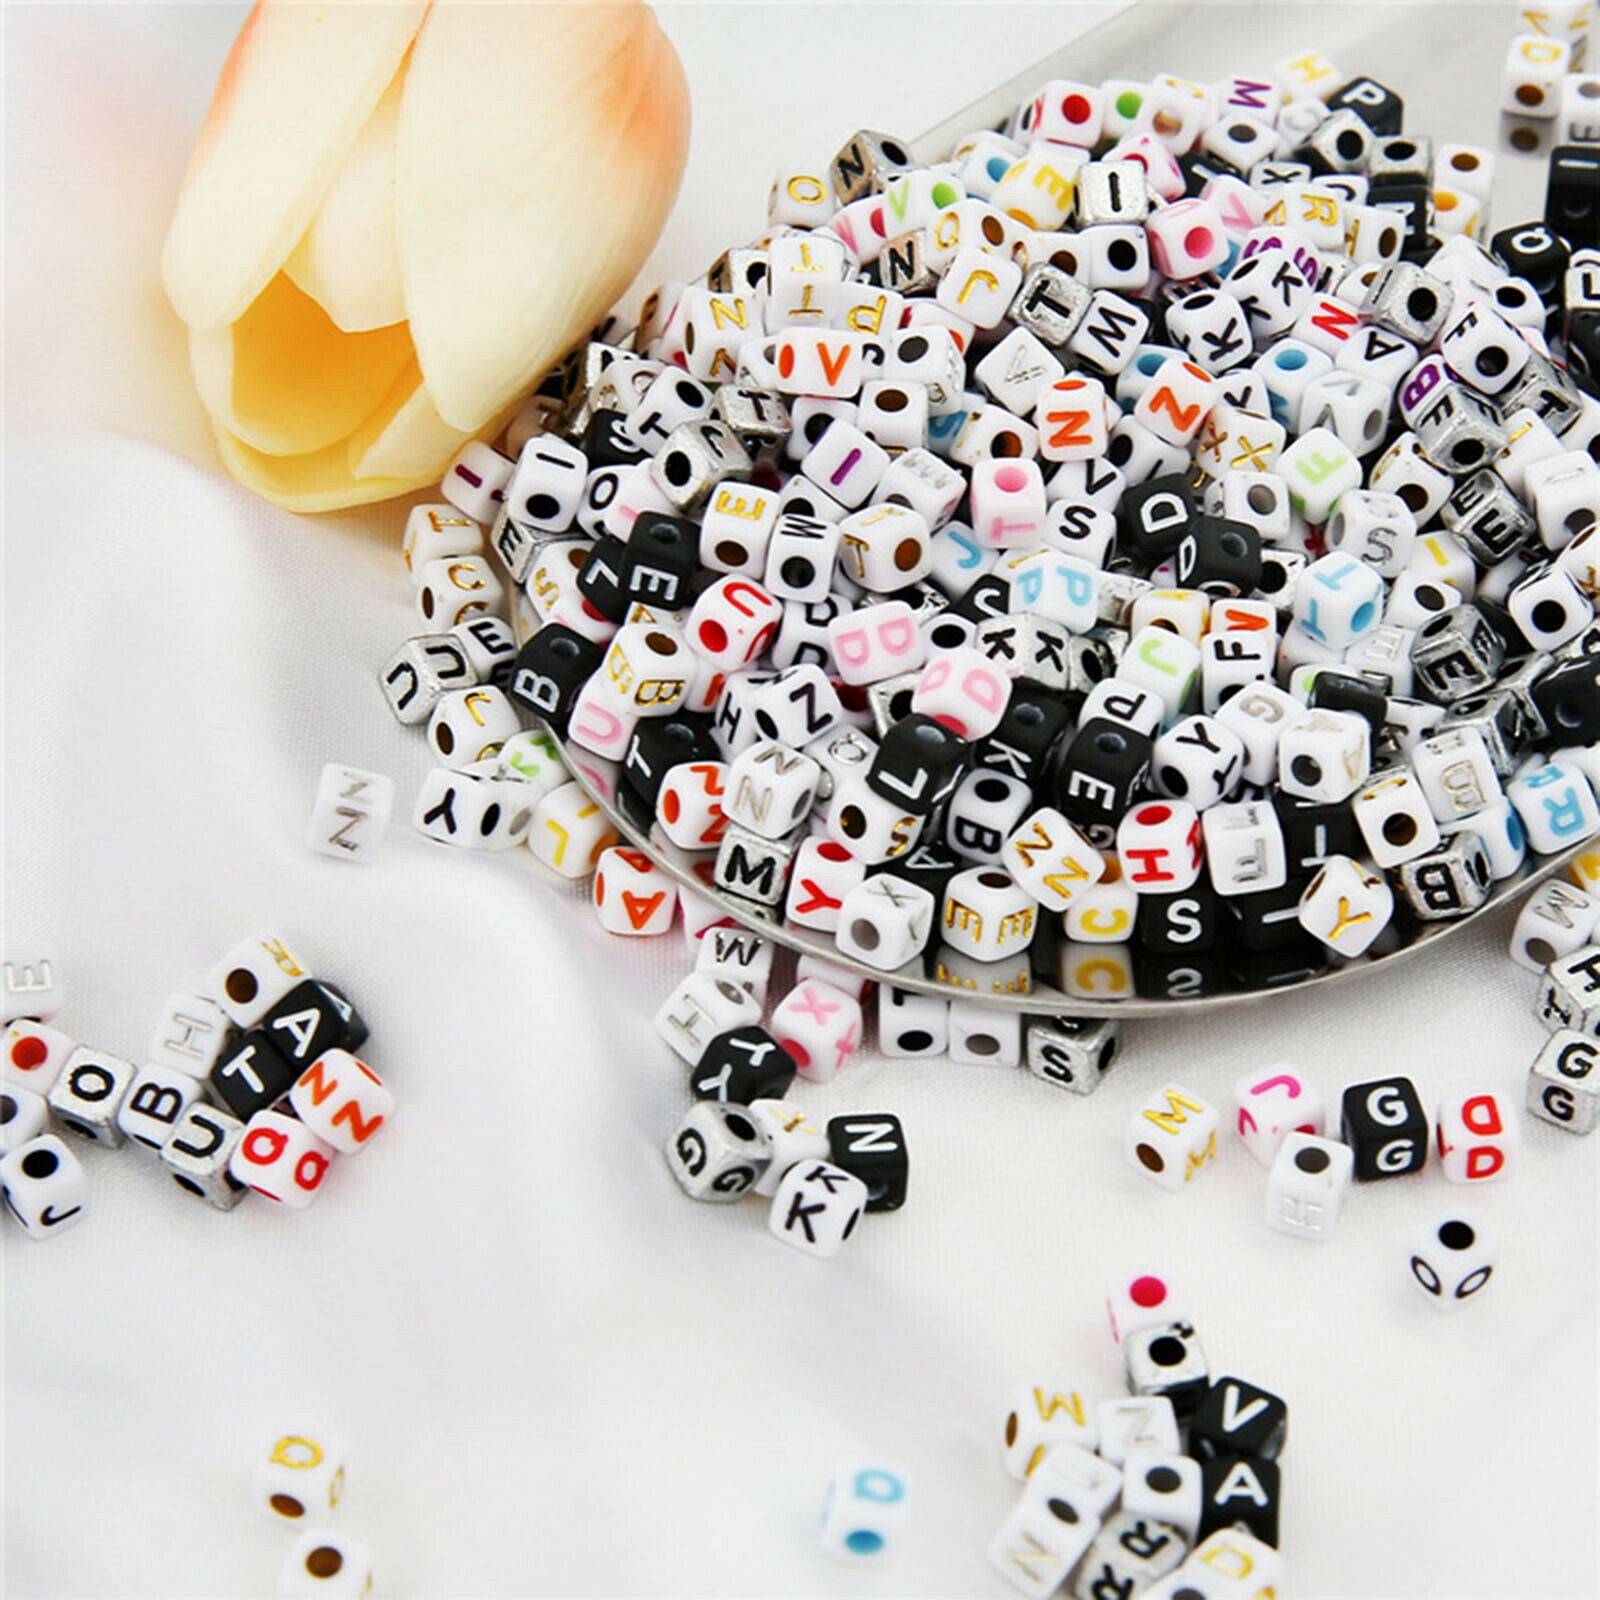 Set of 1200 5mm Square Acrylic A-Z Alphabet Letters Beads DIY Handmade